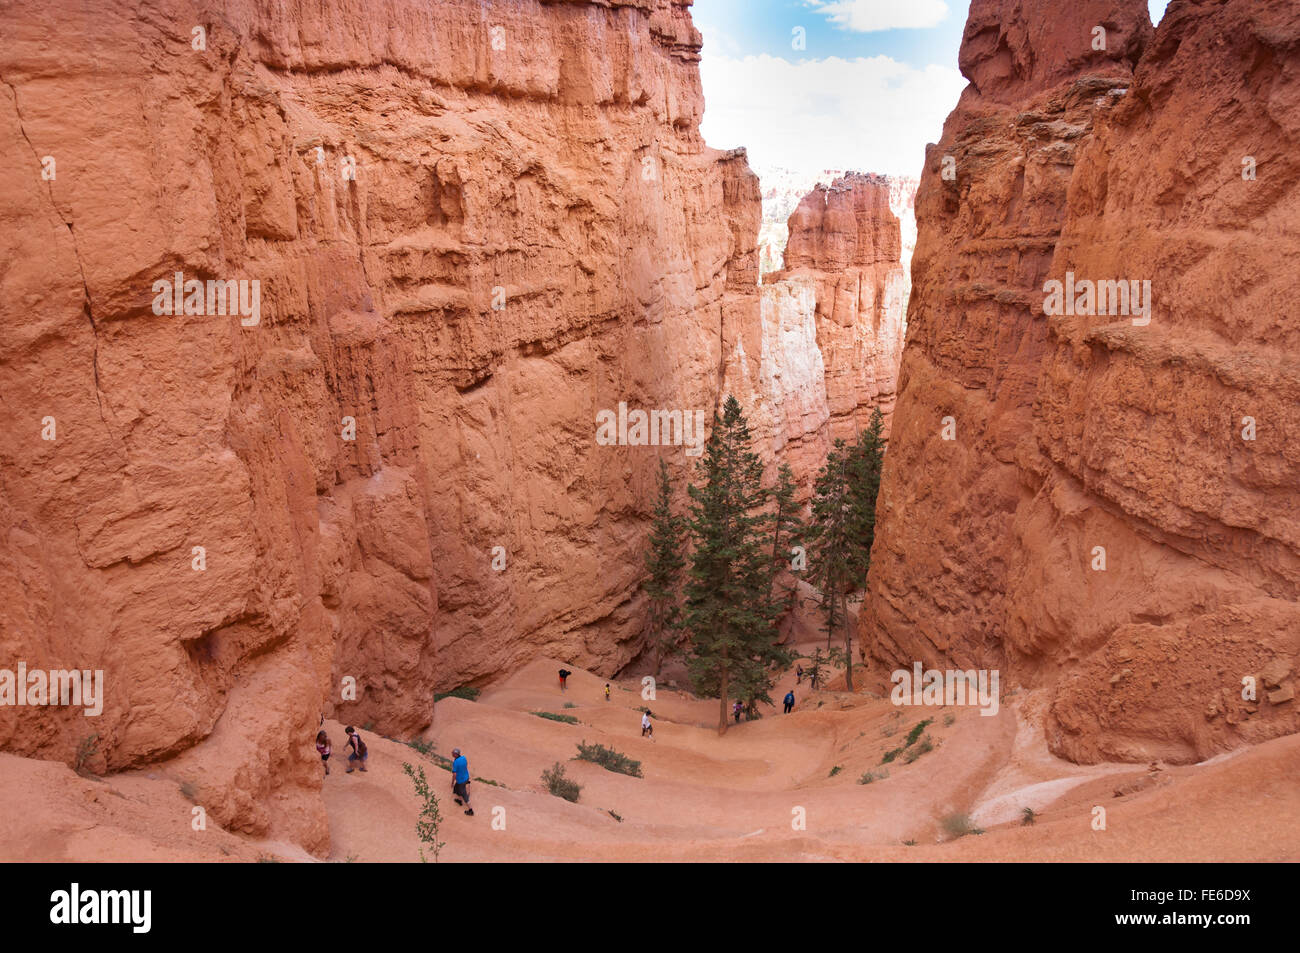 Le Bryce Canyon National Park, Utah, United States Banque D'Images